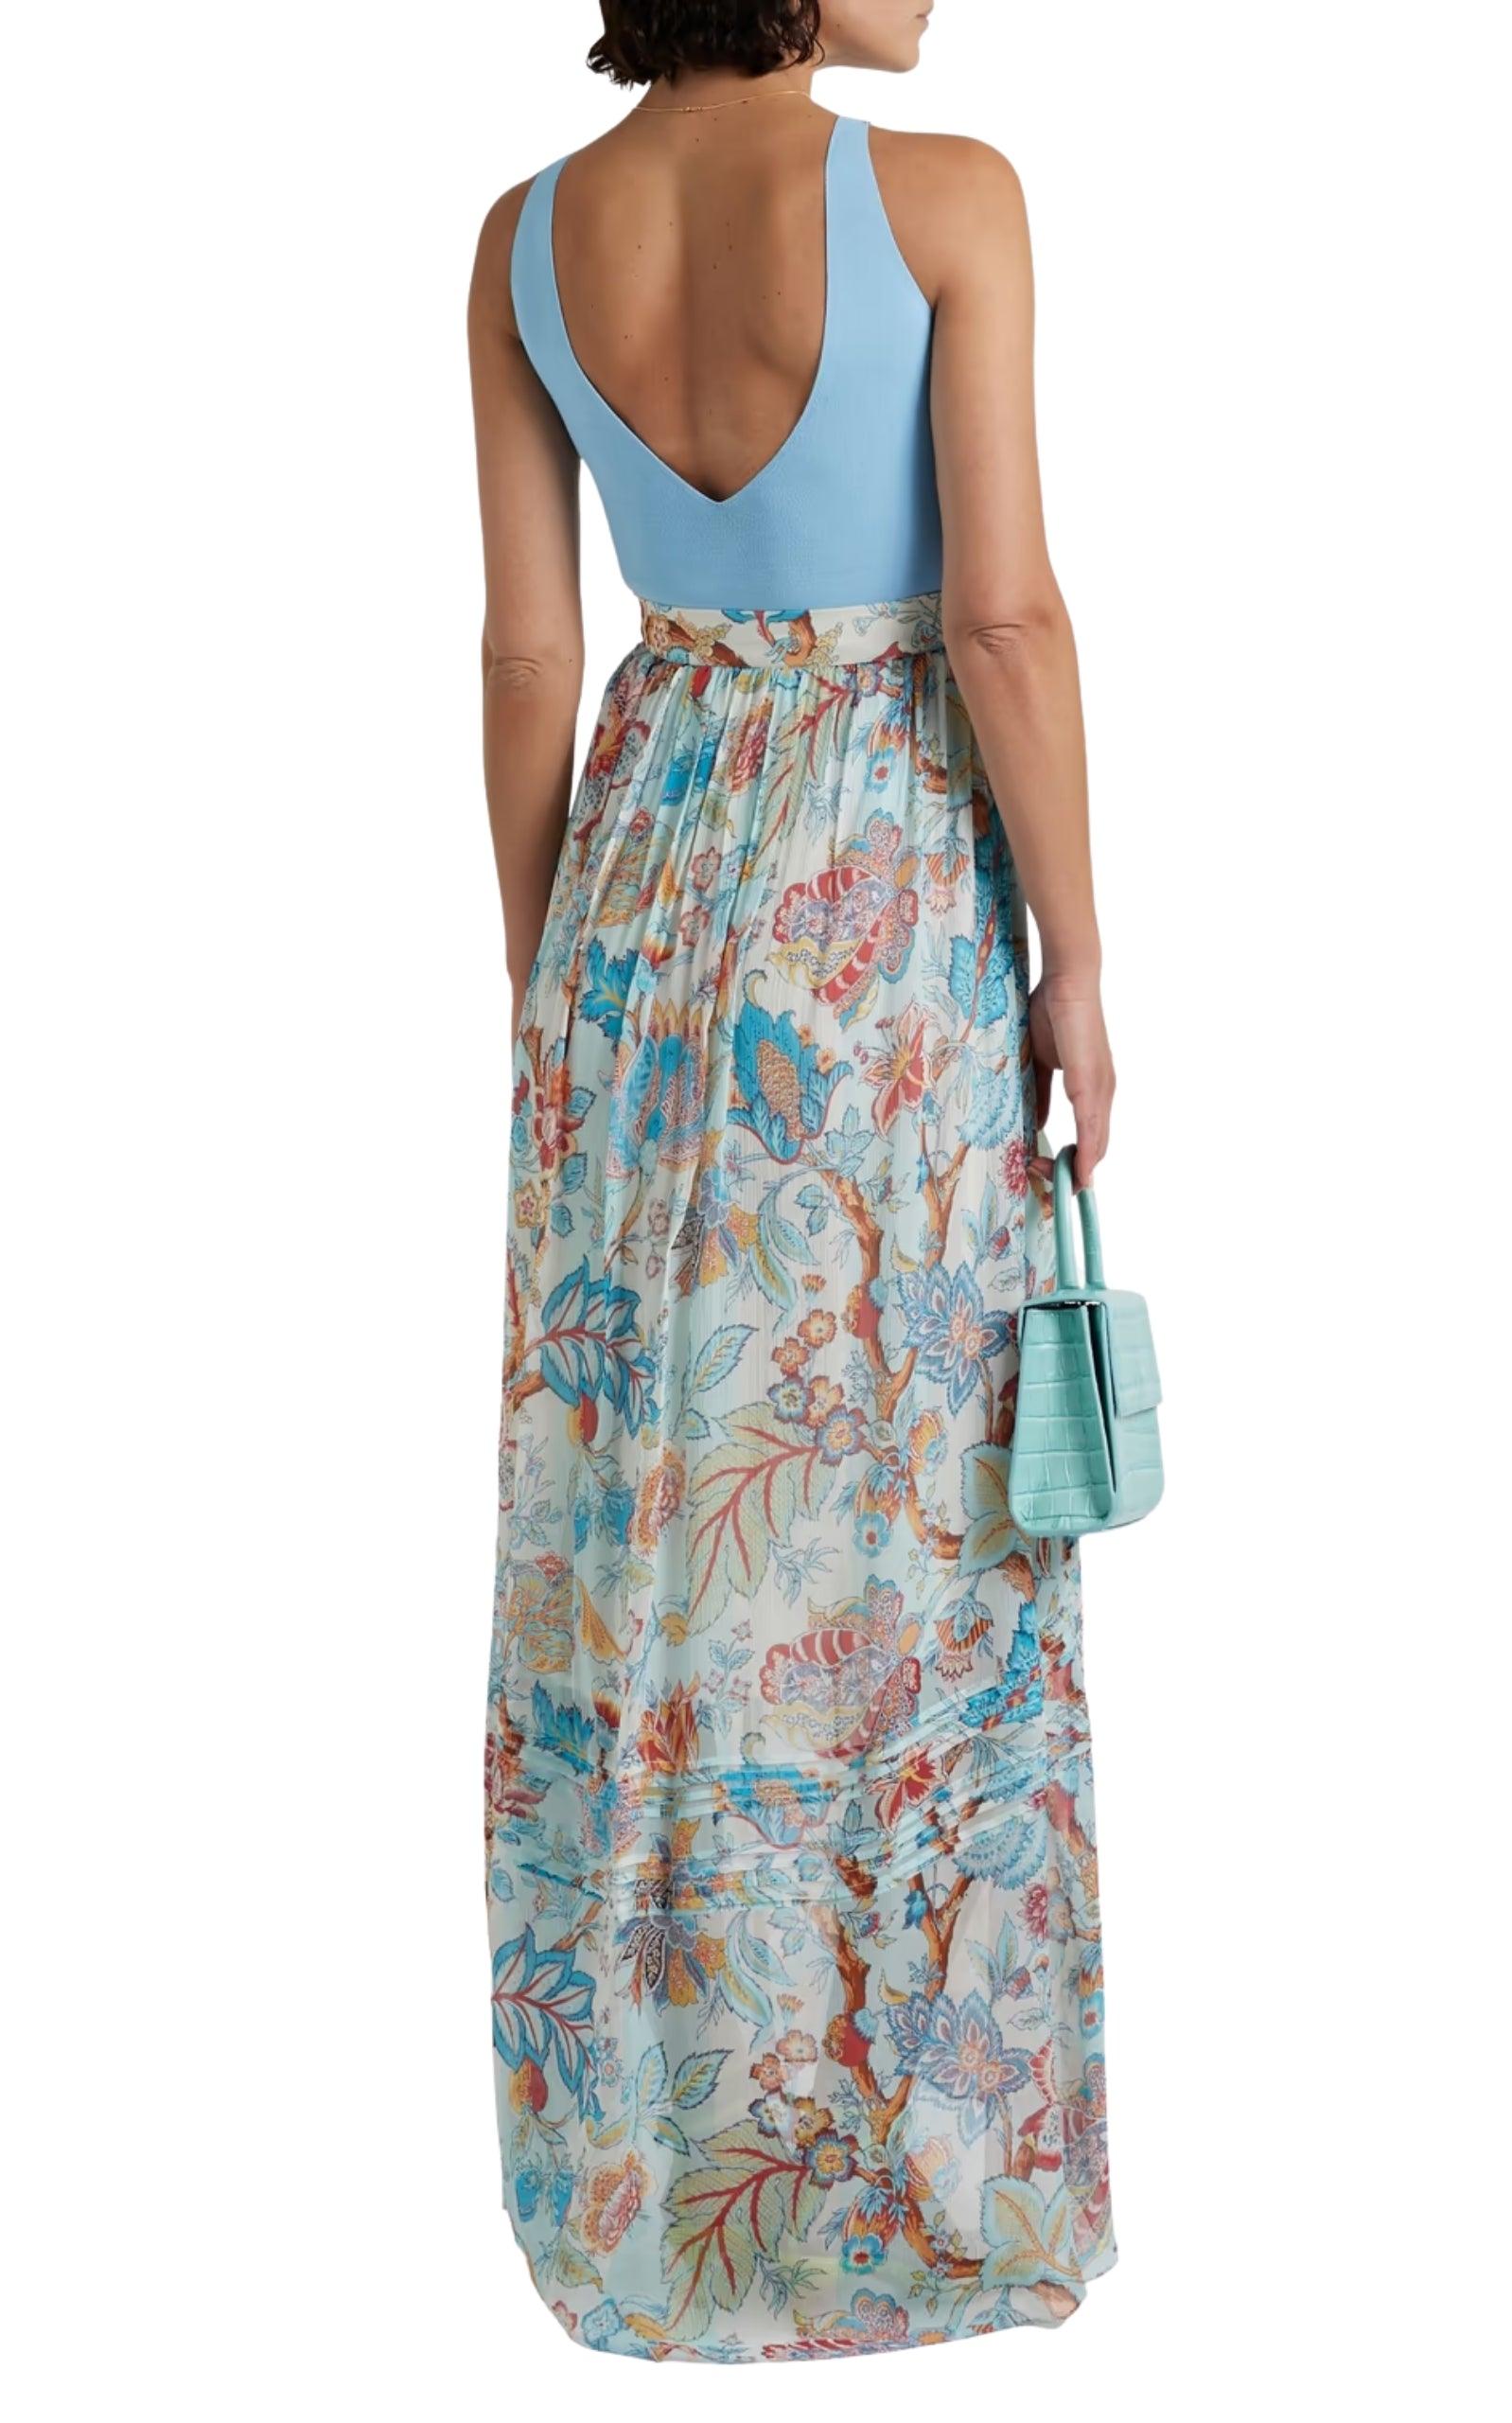  EtroPleated Floral Print Maxi Skirt - Runway Catalog